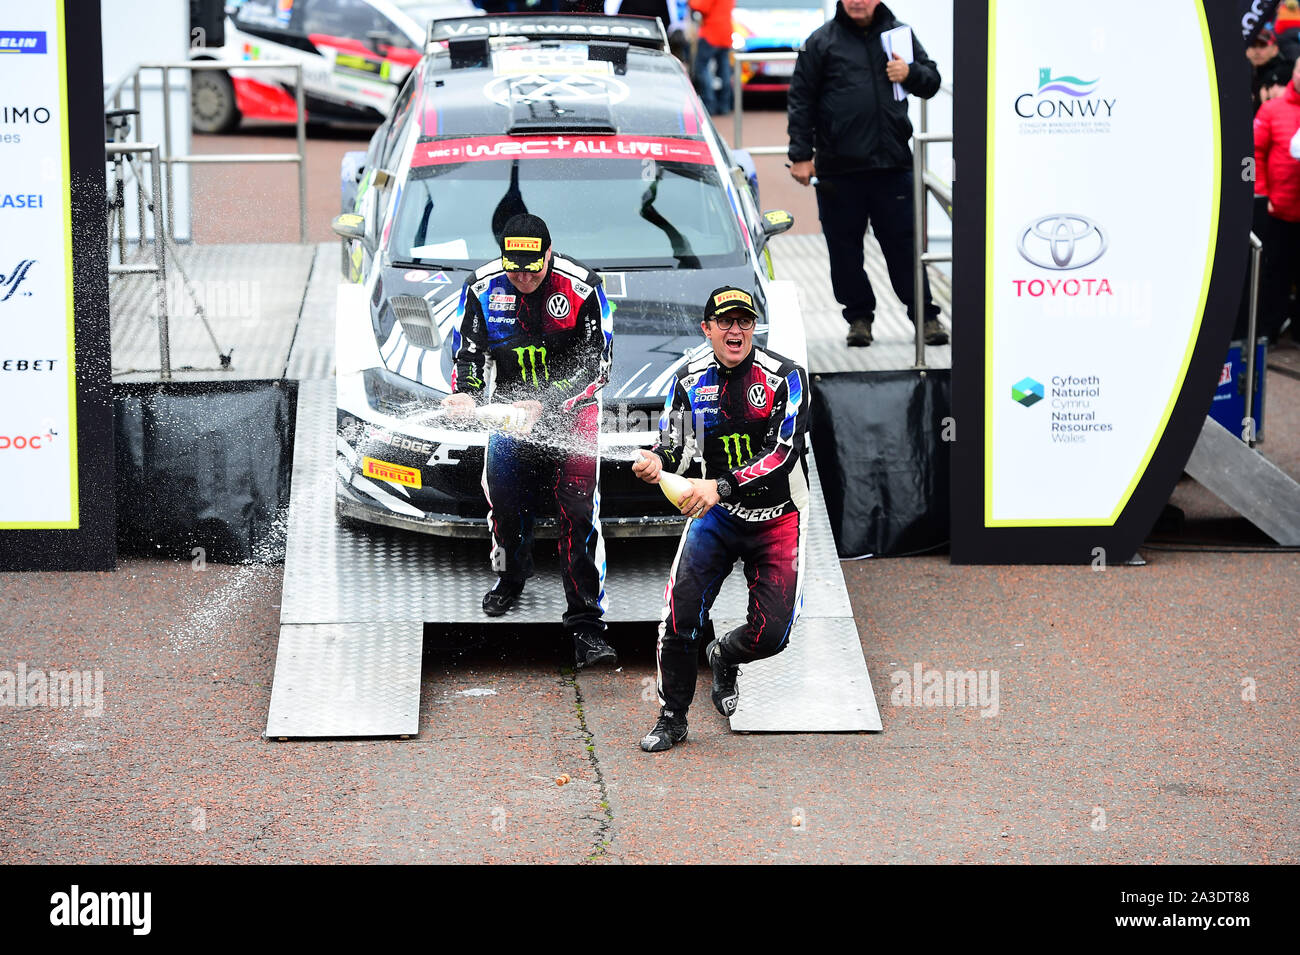 6th October 2019, Wales ; Wales Rally GB 2019 Podium: Petter SOLBERG & Co Driver Phil MILLS competing in the Volkswagen Polo R5 celebrate by spraying Champagne on friends and family Credit: Gareth Dalley/News Images Stock Photo